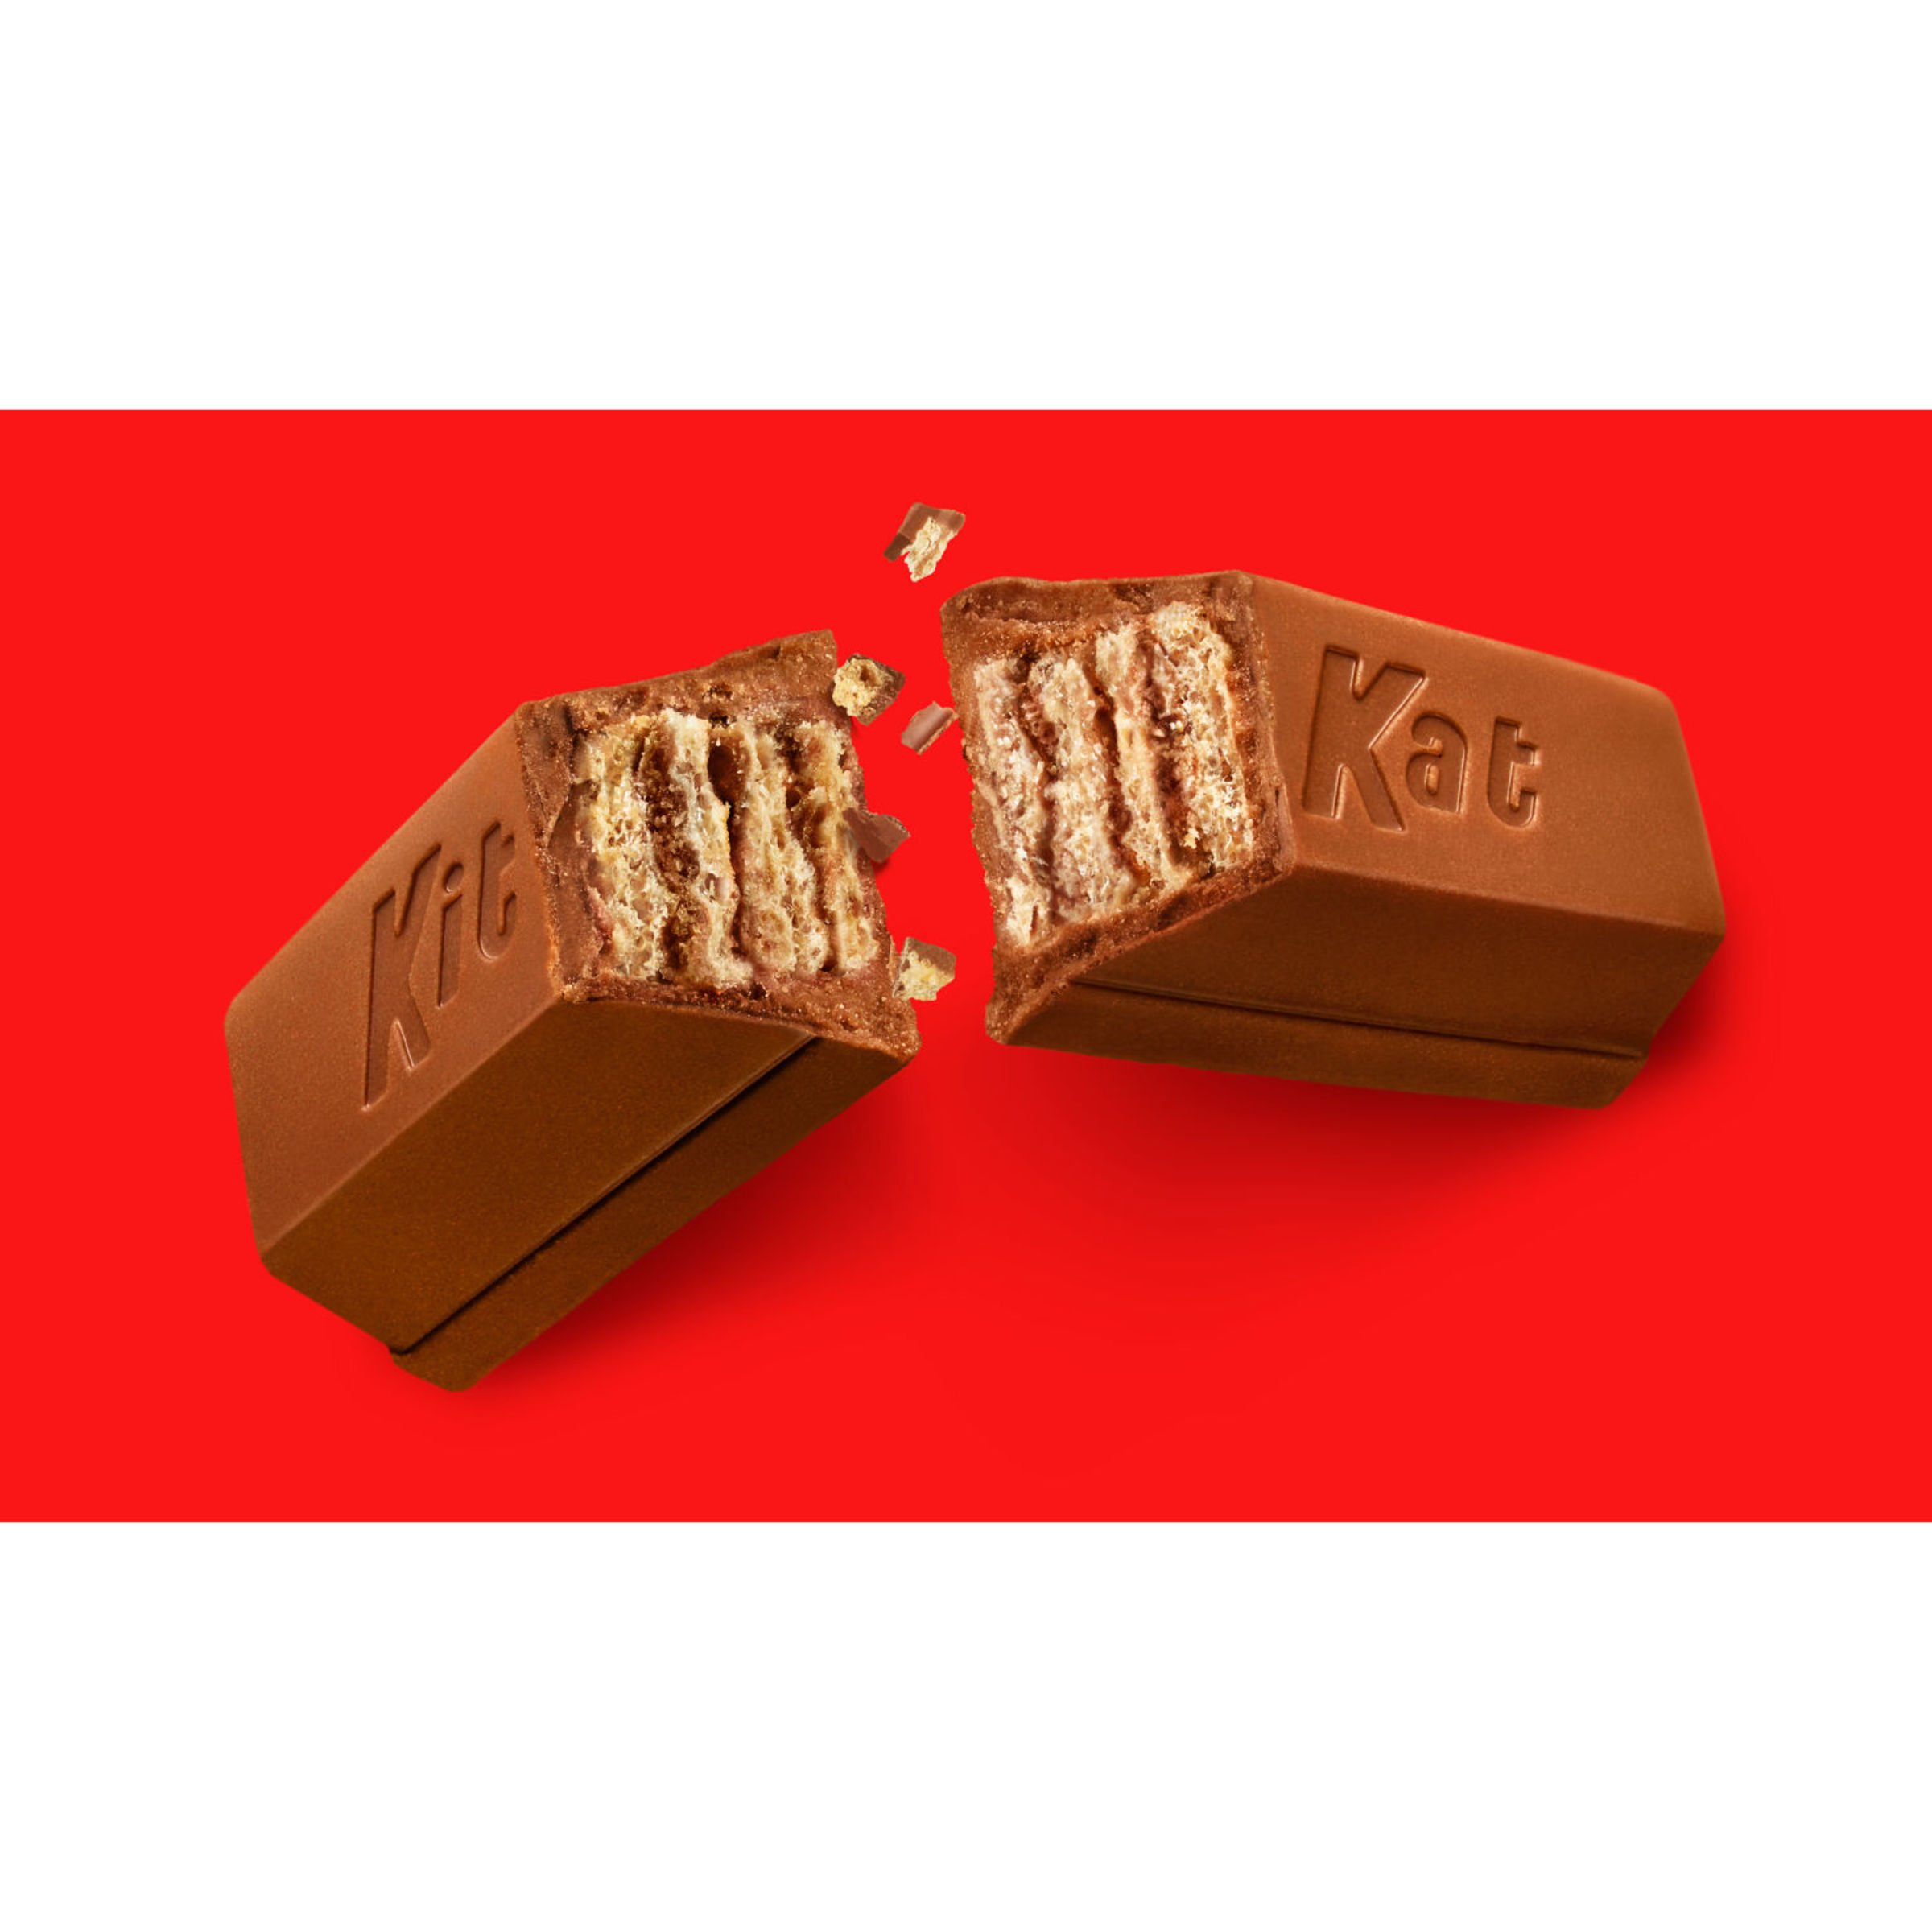 Kit Kat Milk Chocolate Snack Size Candy Bars - Pantry Pack - Shop Candy at  H-E-B